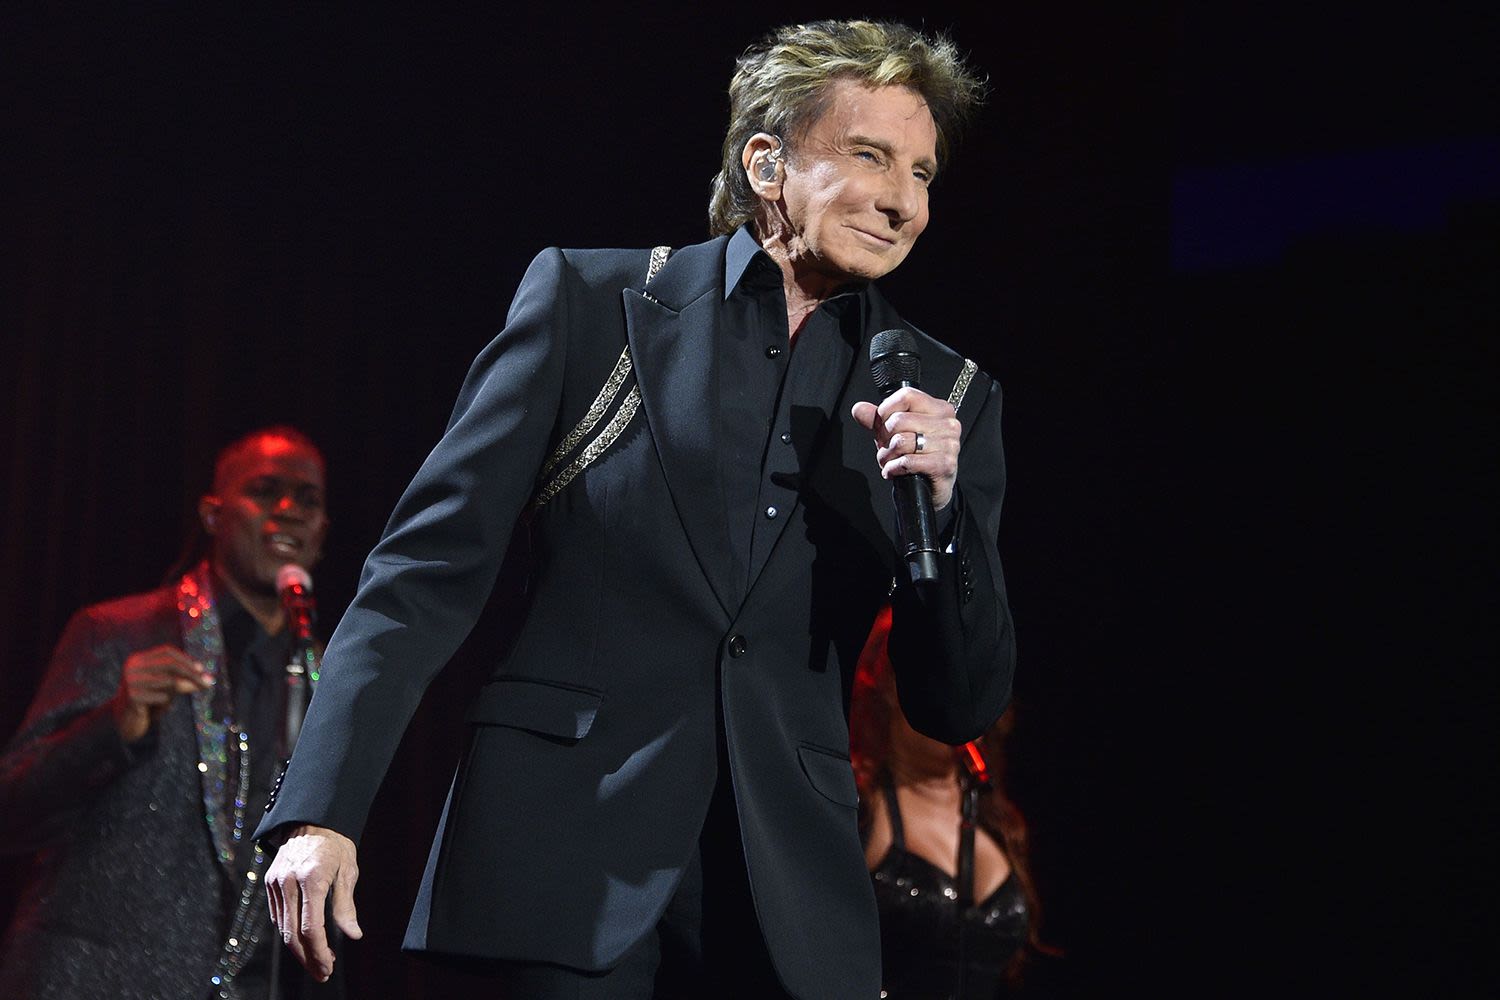 Barry Manilow Returns to Stage for London Residency After Canceling Show 'Under Doctor's Orders'